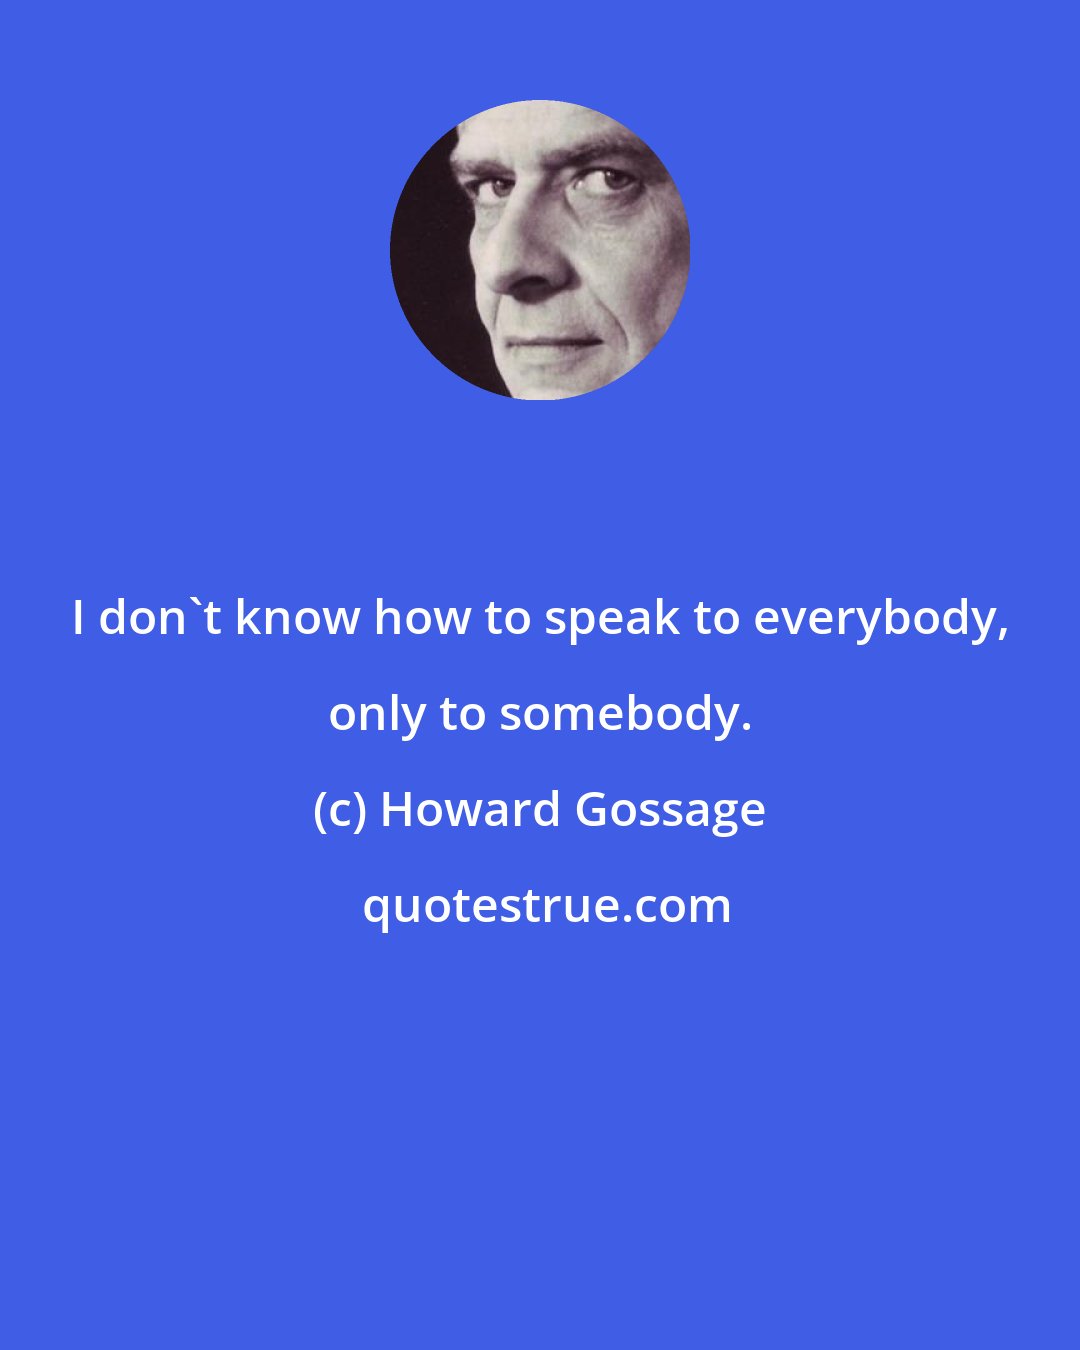 Howard Gossage: I don't know how to speak to everybody, only to somebody.